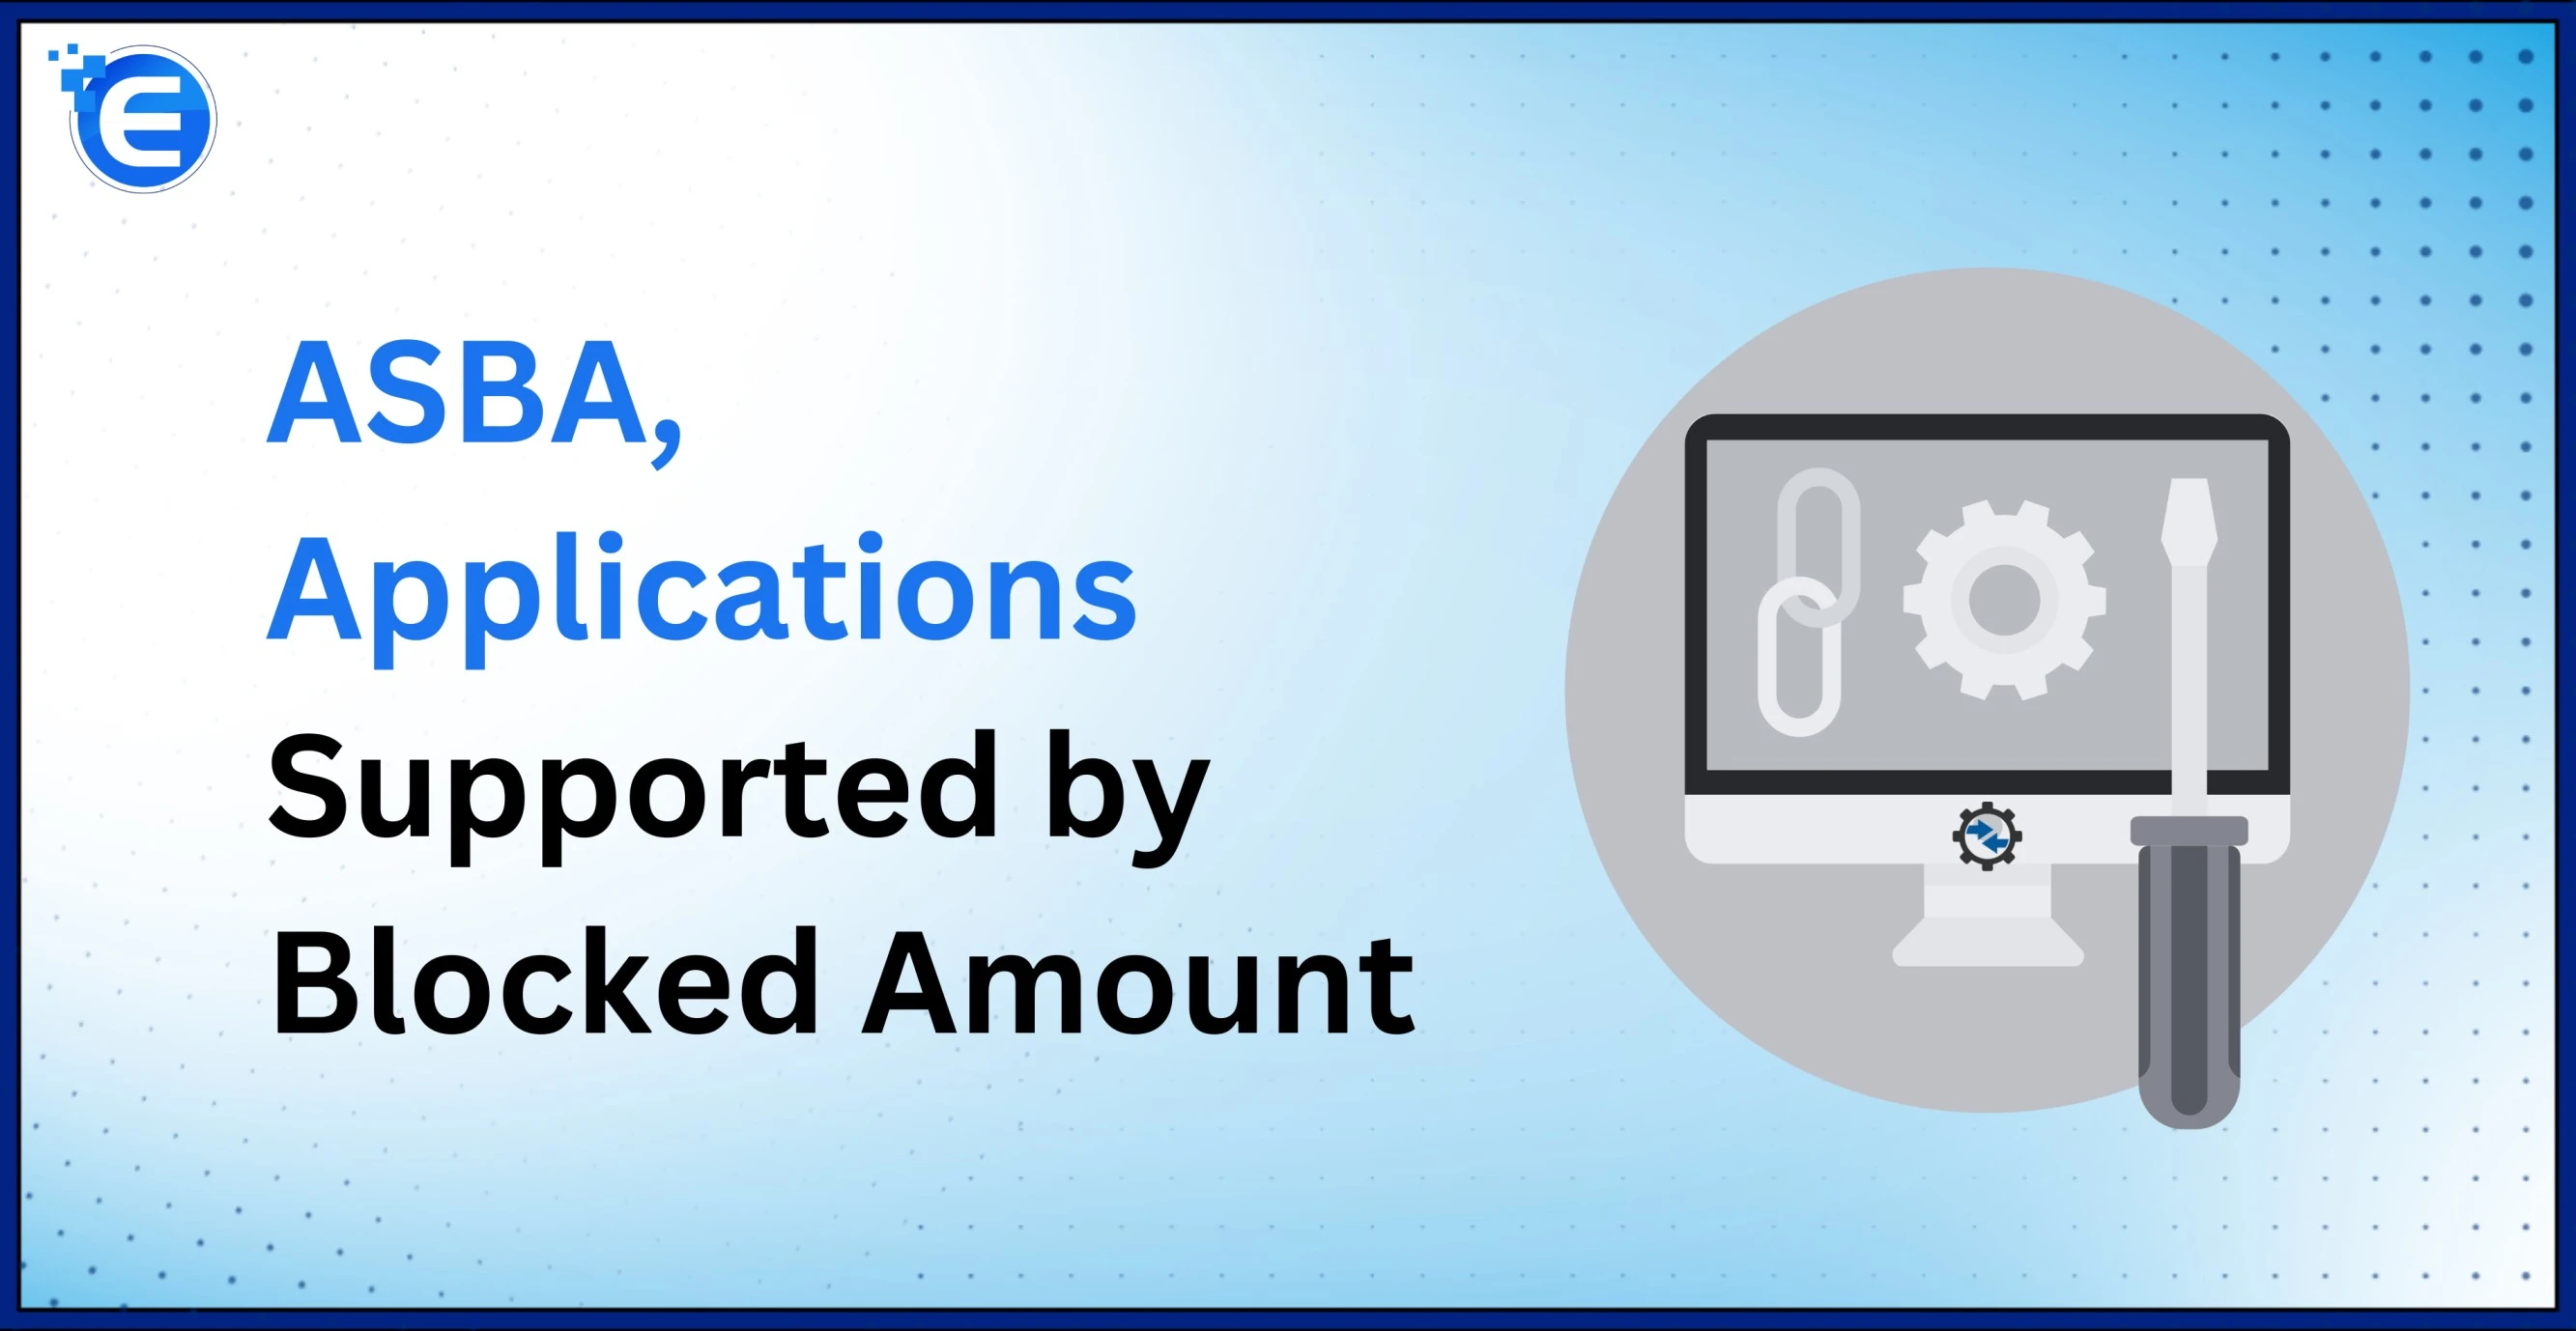 ASBA, Applications Supported by Blocked Amount